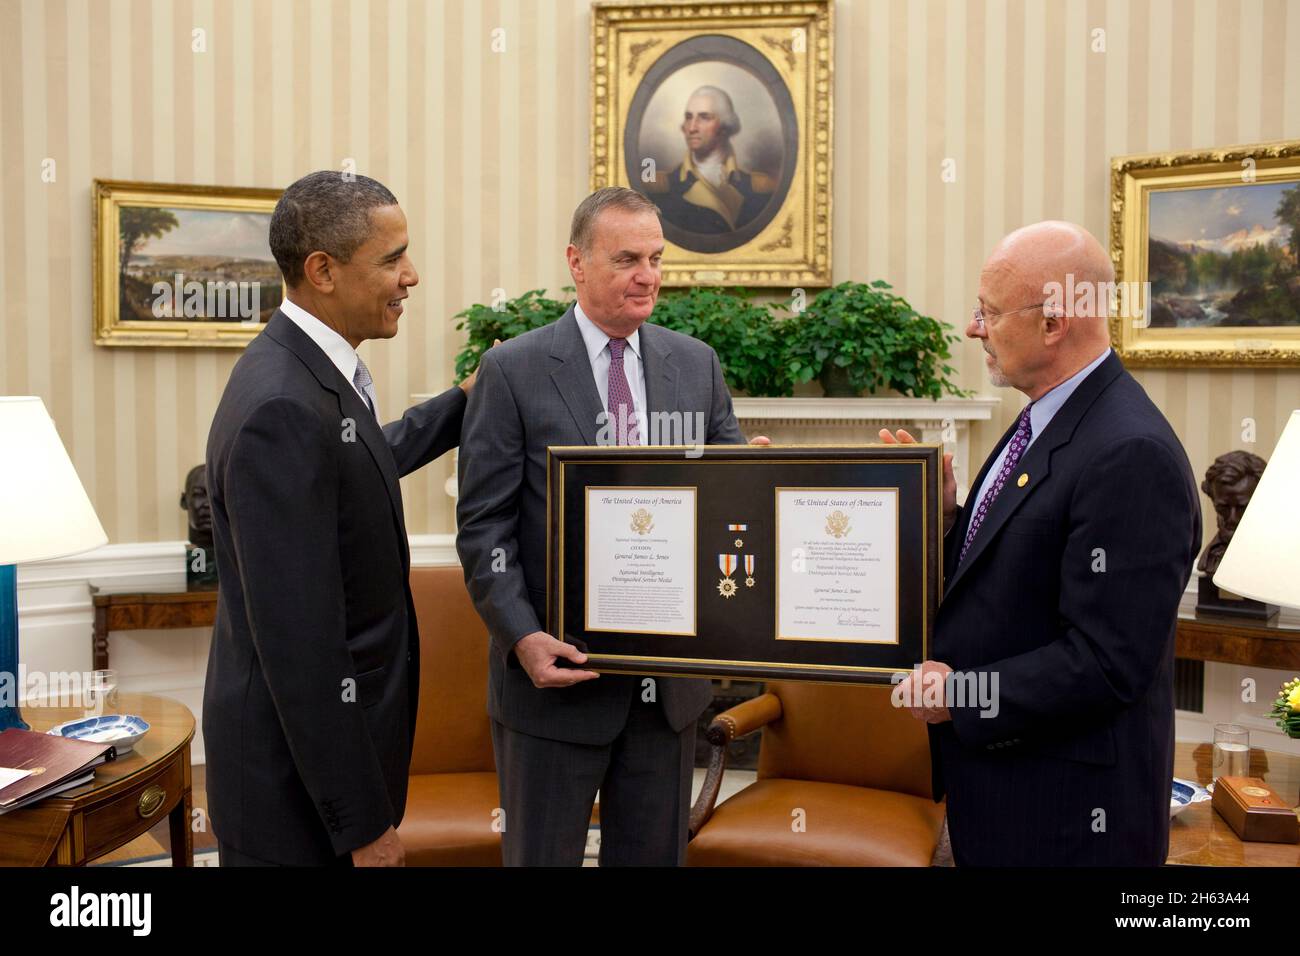 President Barack Obama and Director of National Intelligence James Clapper present an the National Distinguished Service Medal to National Security Advisor Gen. James L. Jones in the Oval Office, Oct. 20, 2010. Stock Photo